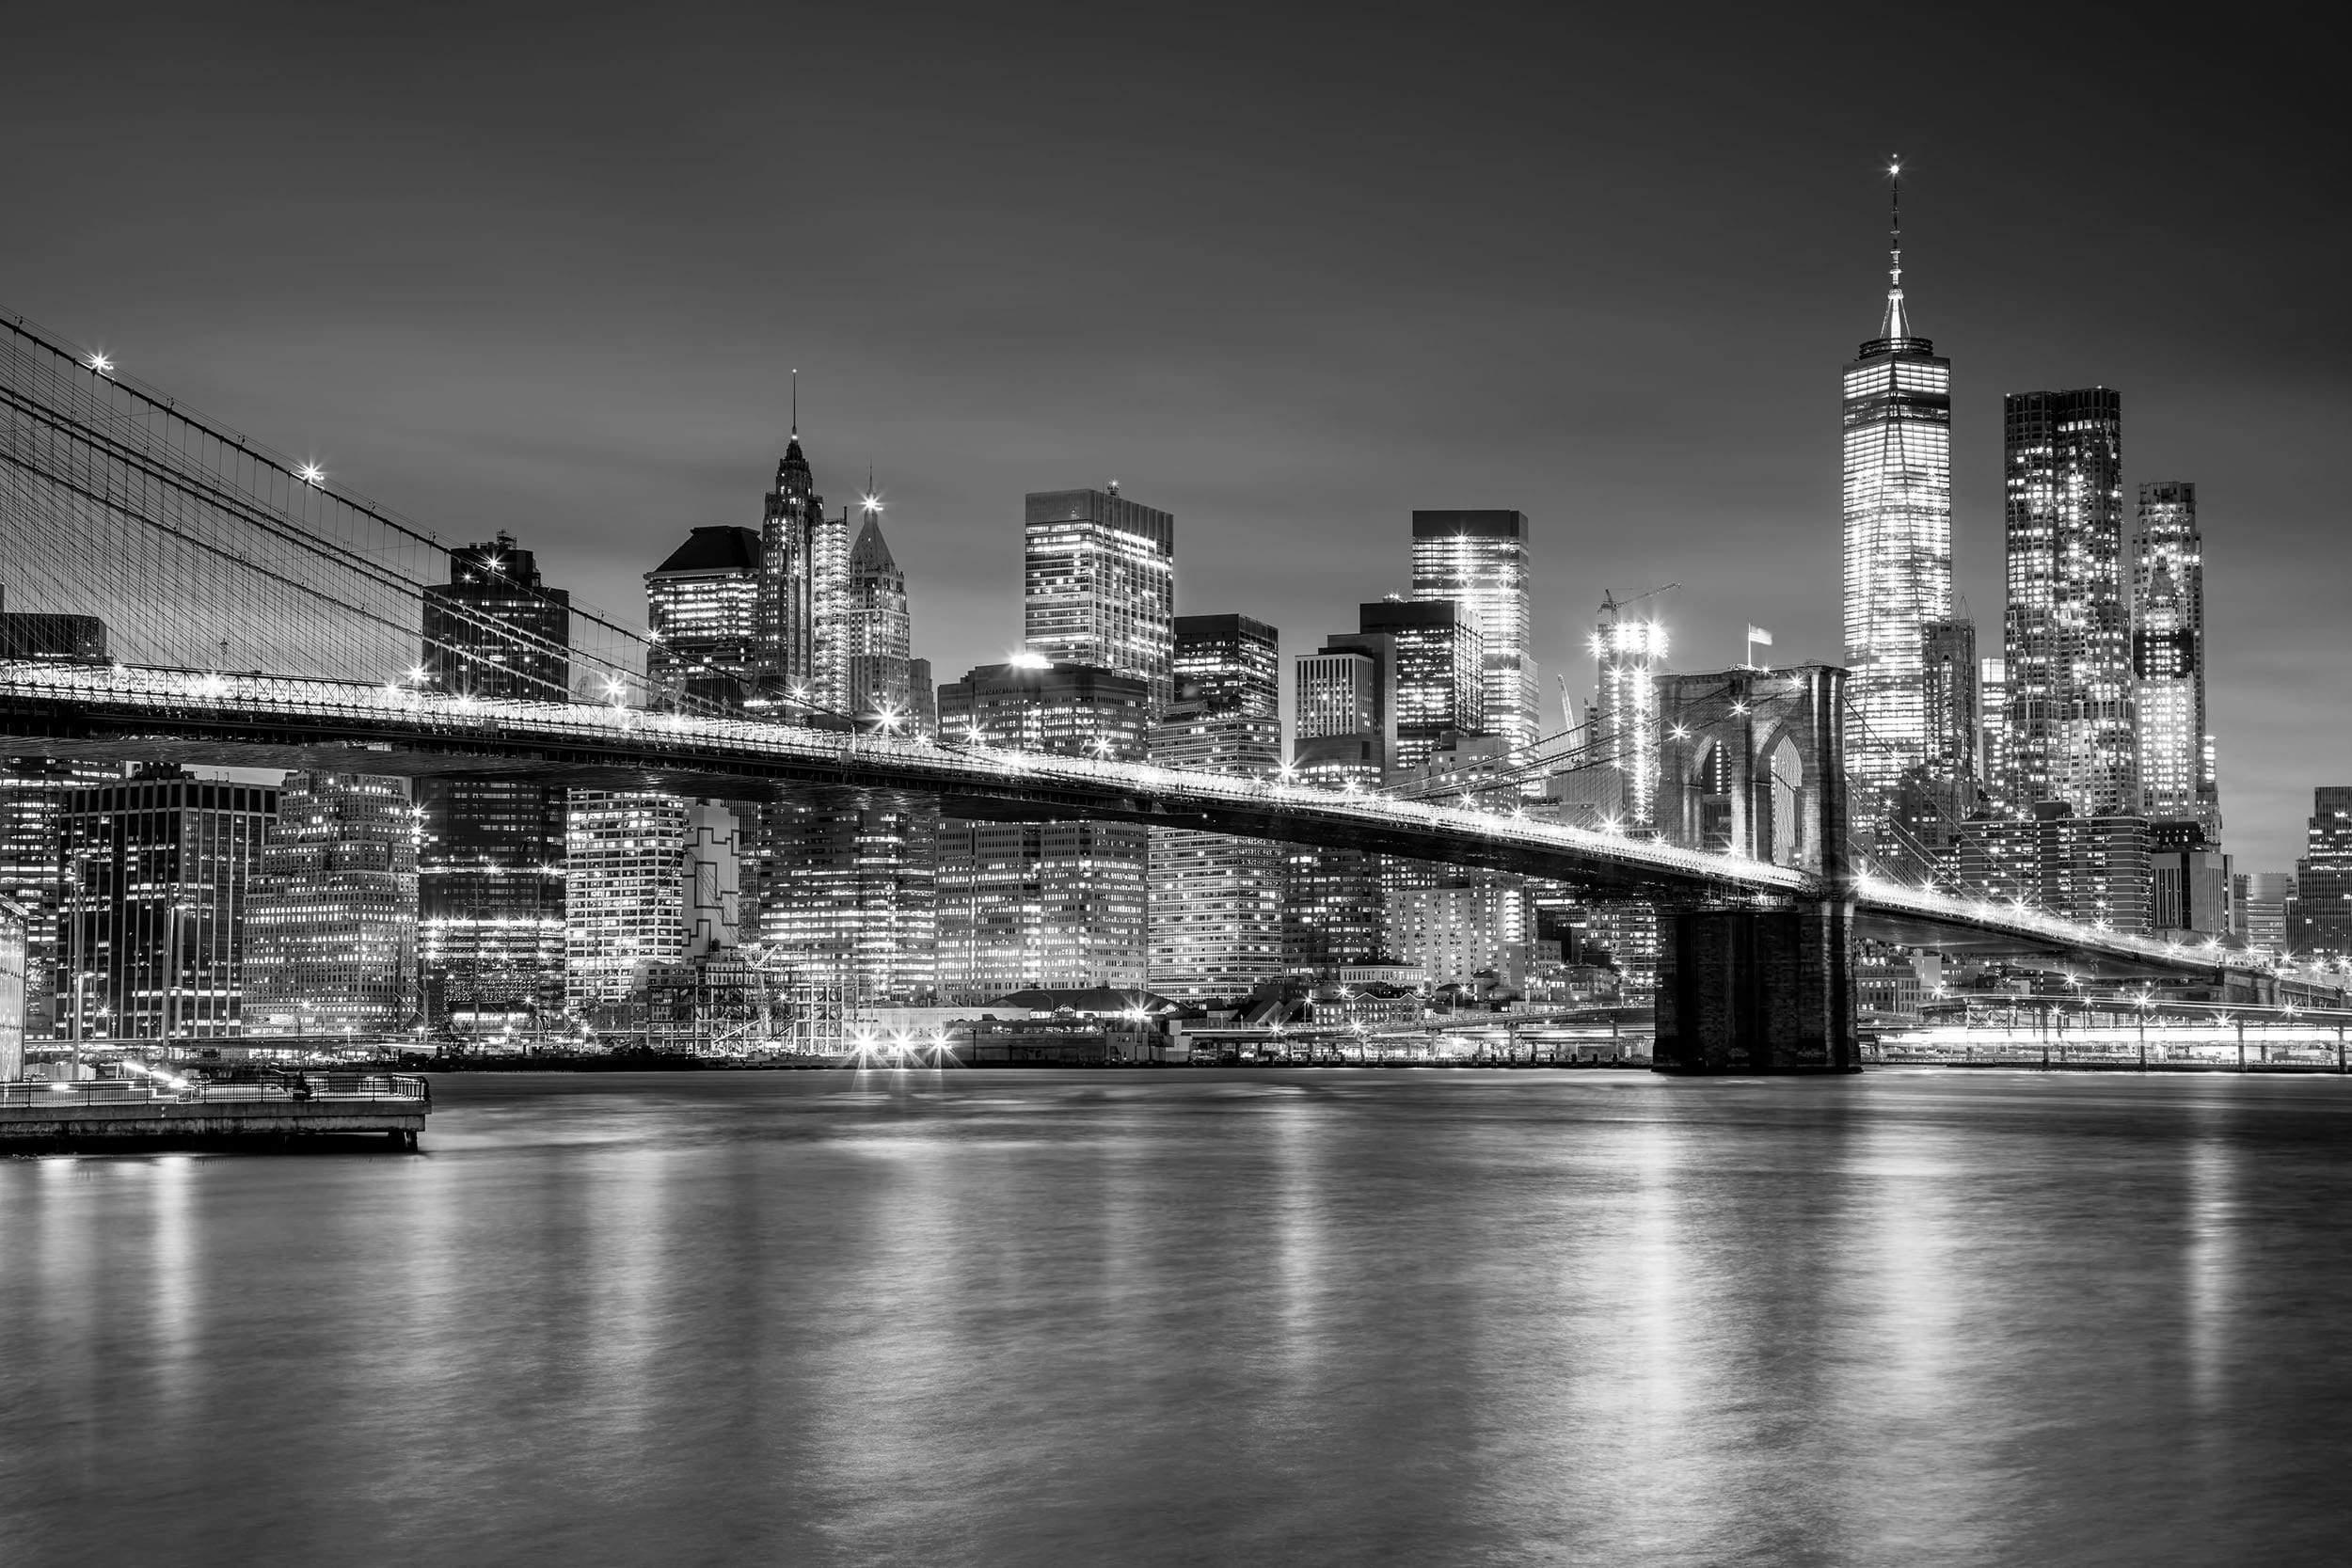 B&W Brooklyn Bridge with NYC in Background, Wallpaper, Peel-N-Stick and Removes Easily Anytime